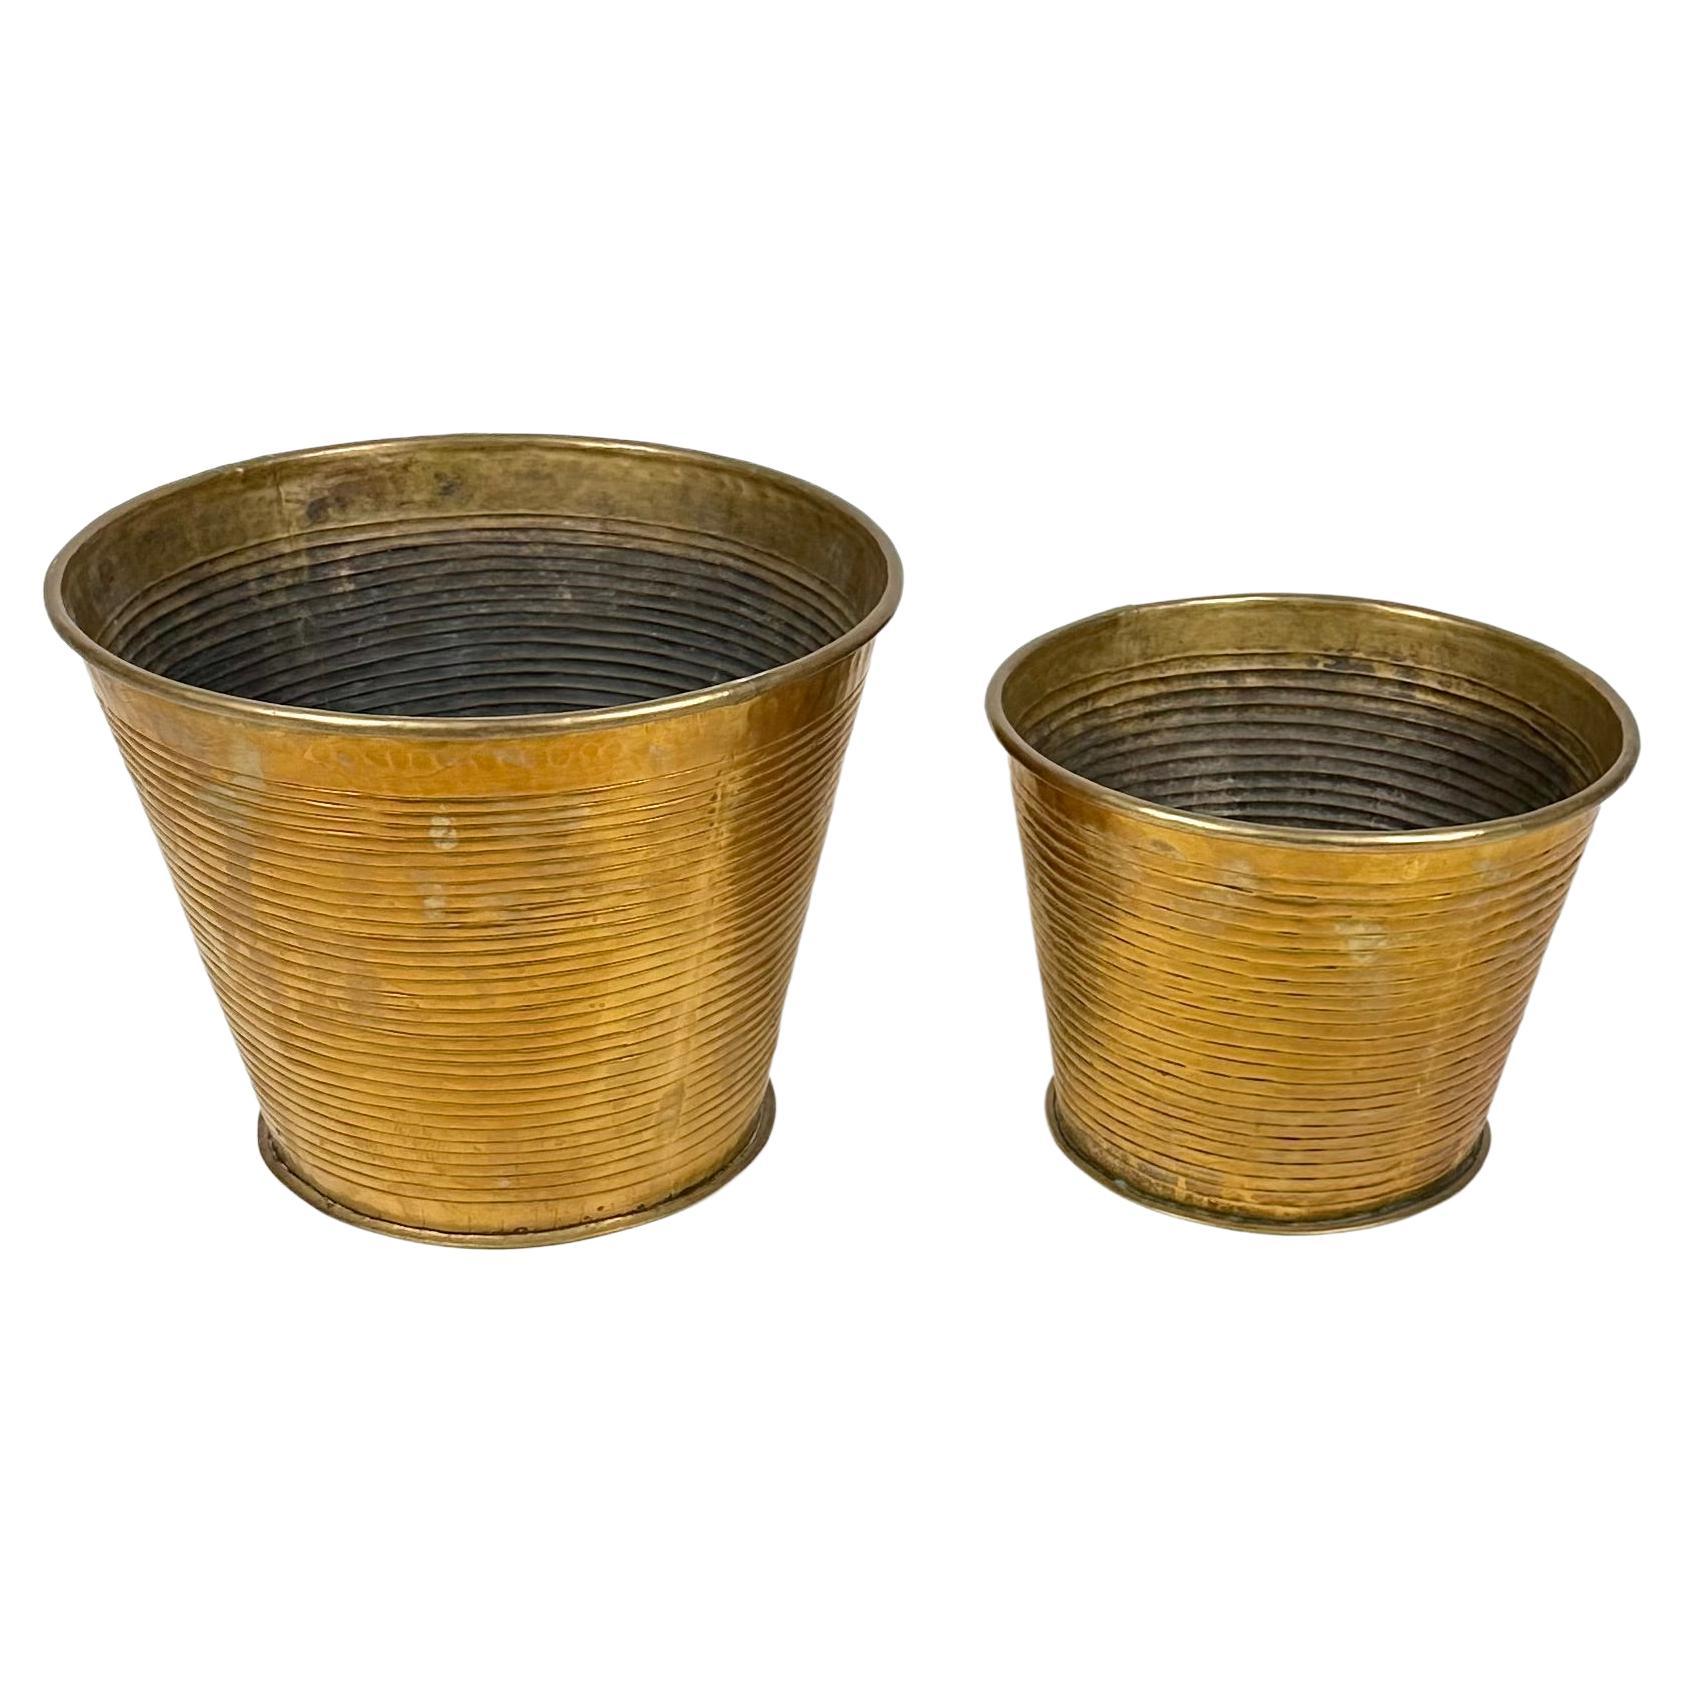 Midcentury pair of waste paper basket in brass.

Made in Italy in the 1960s.